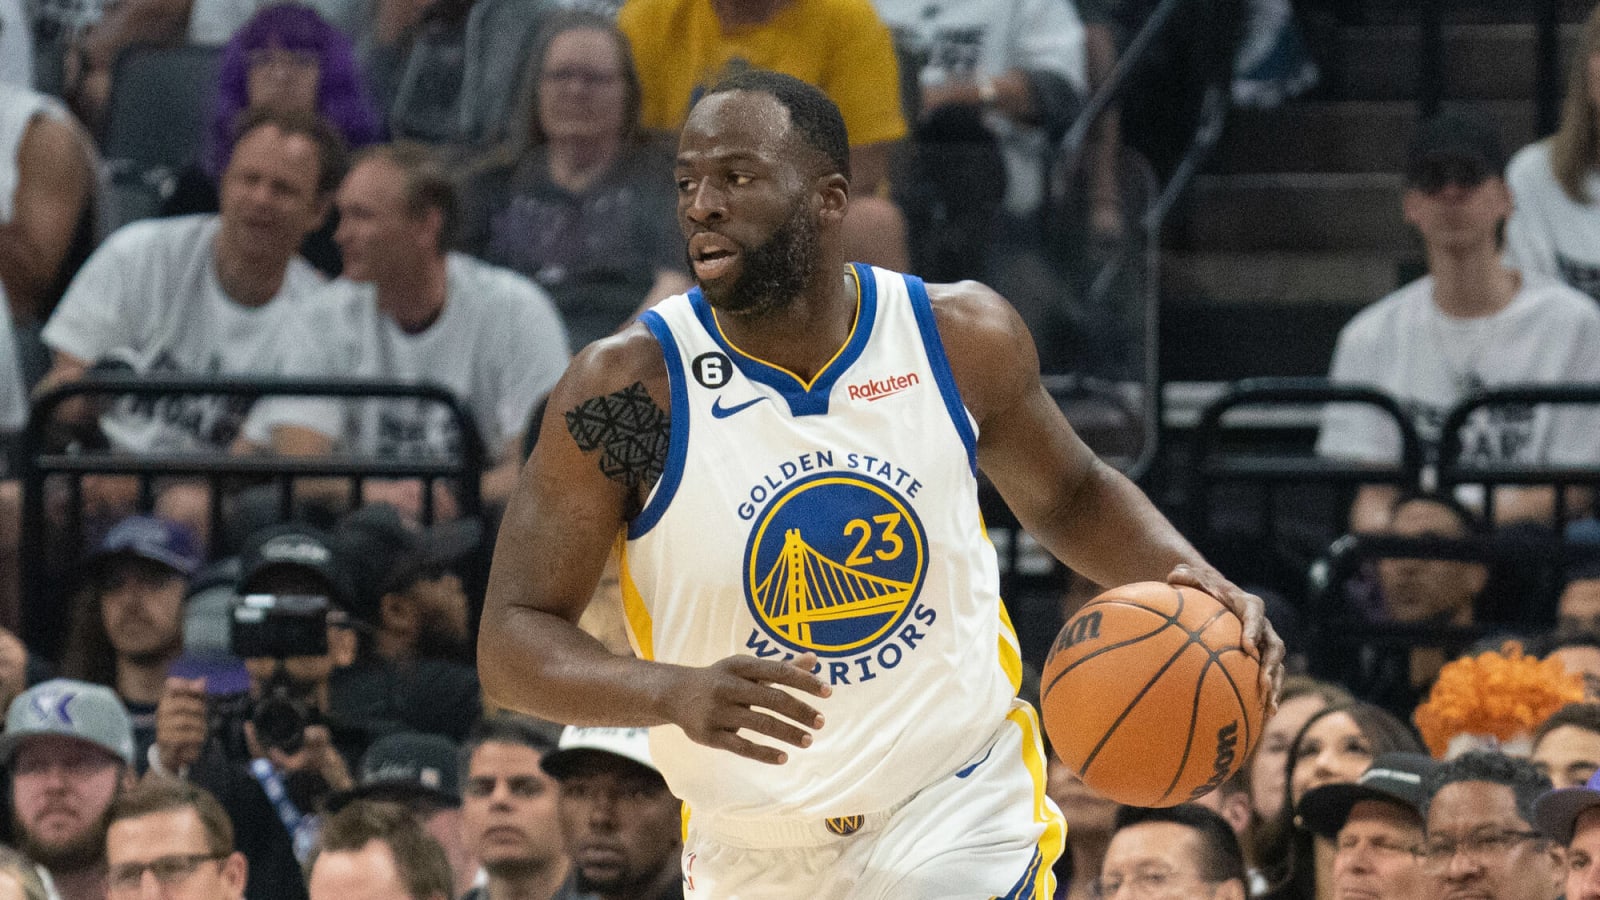 Draymond Green could leave Warriors after Bob Myers’ exit